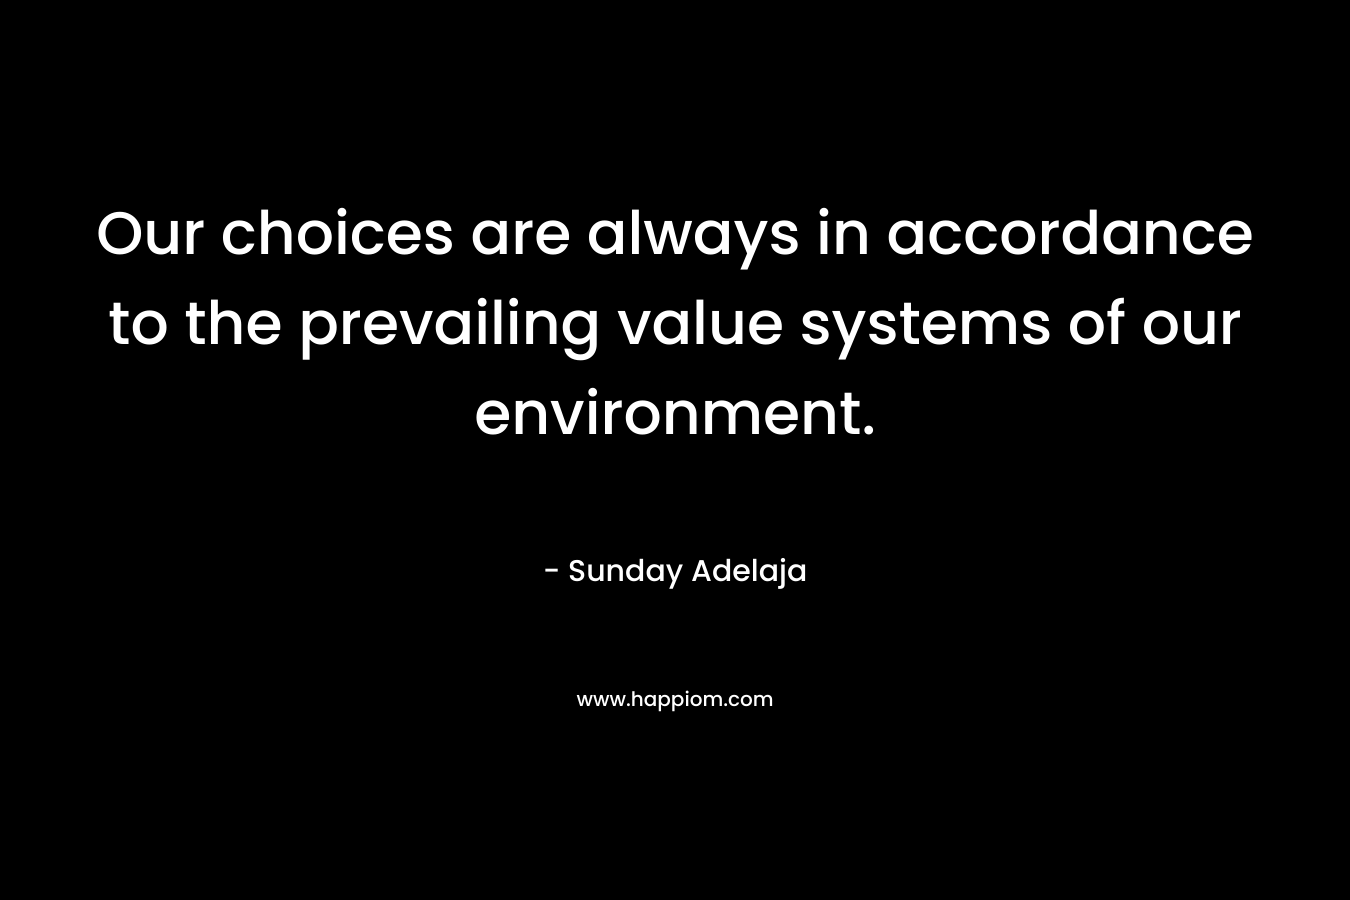 Our choices are always in accordance to the prevailing value systems of our environment.